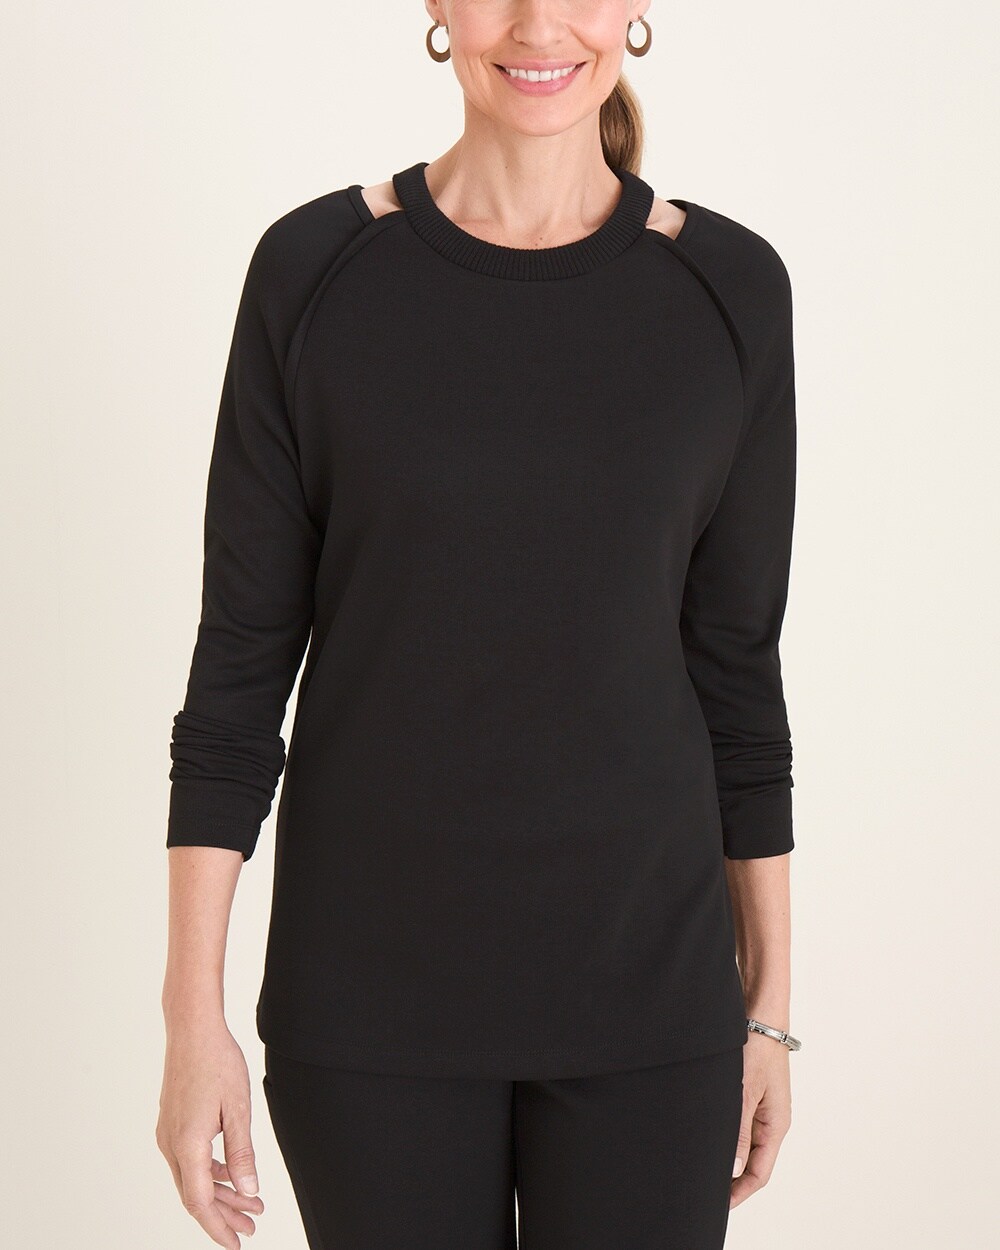 Zenergy Cut-Out Detail Knit Pullover Top